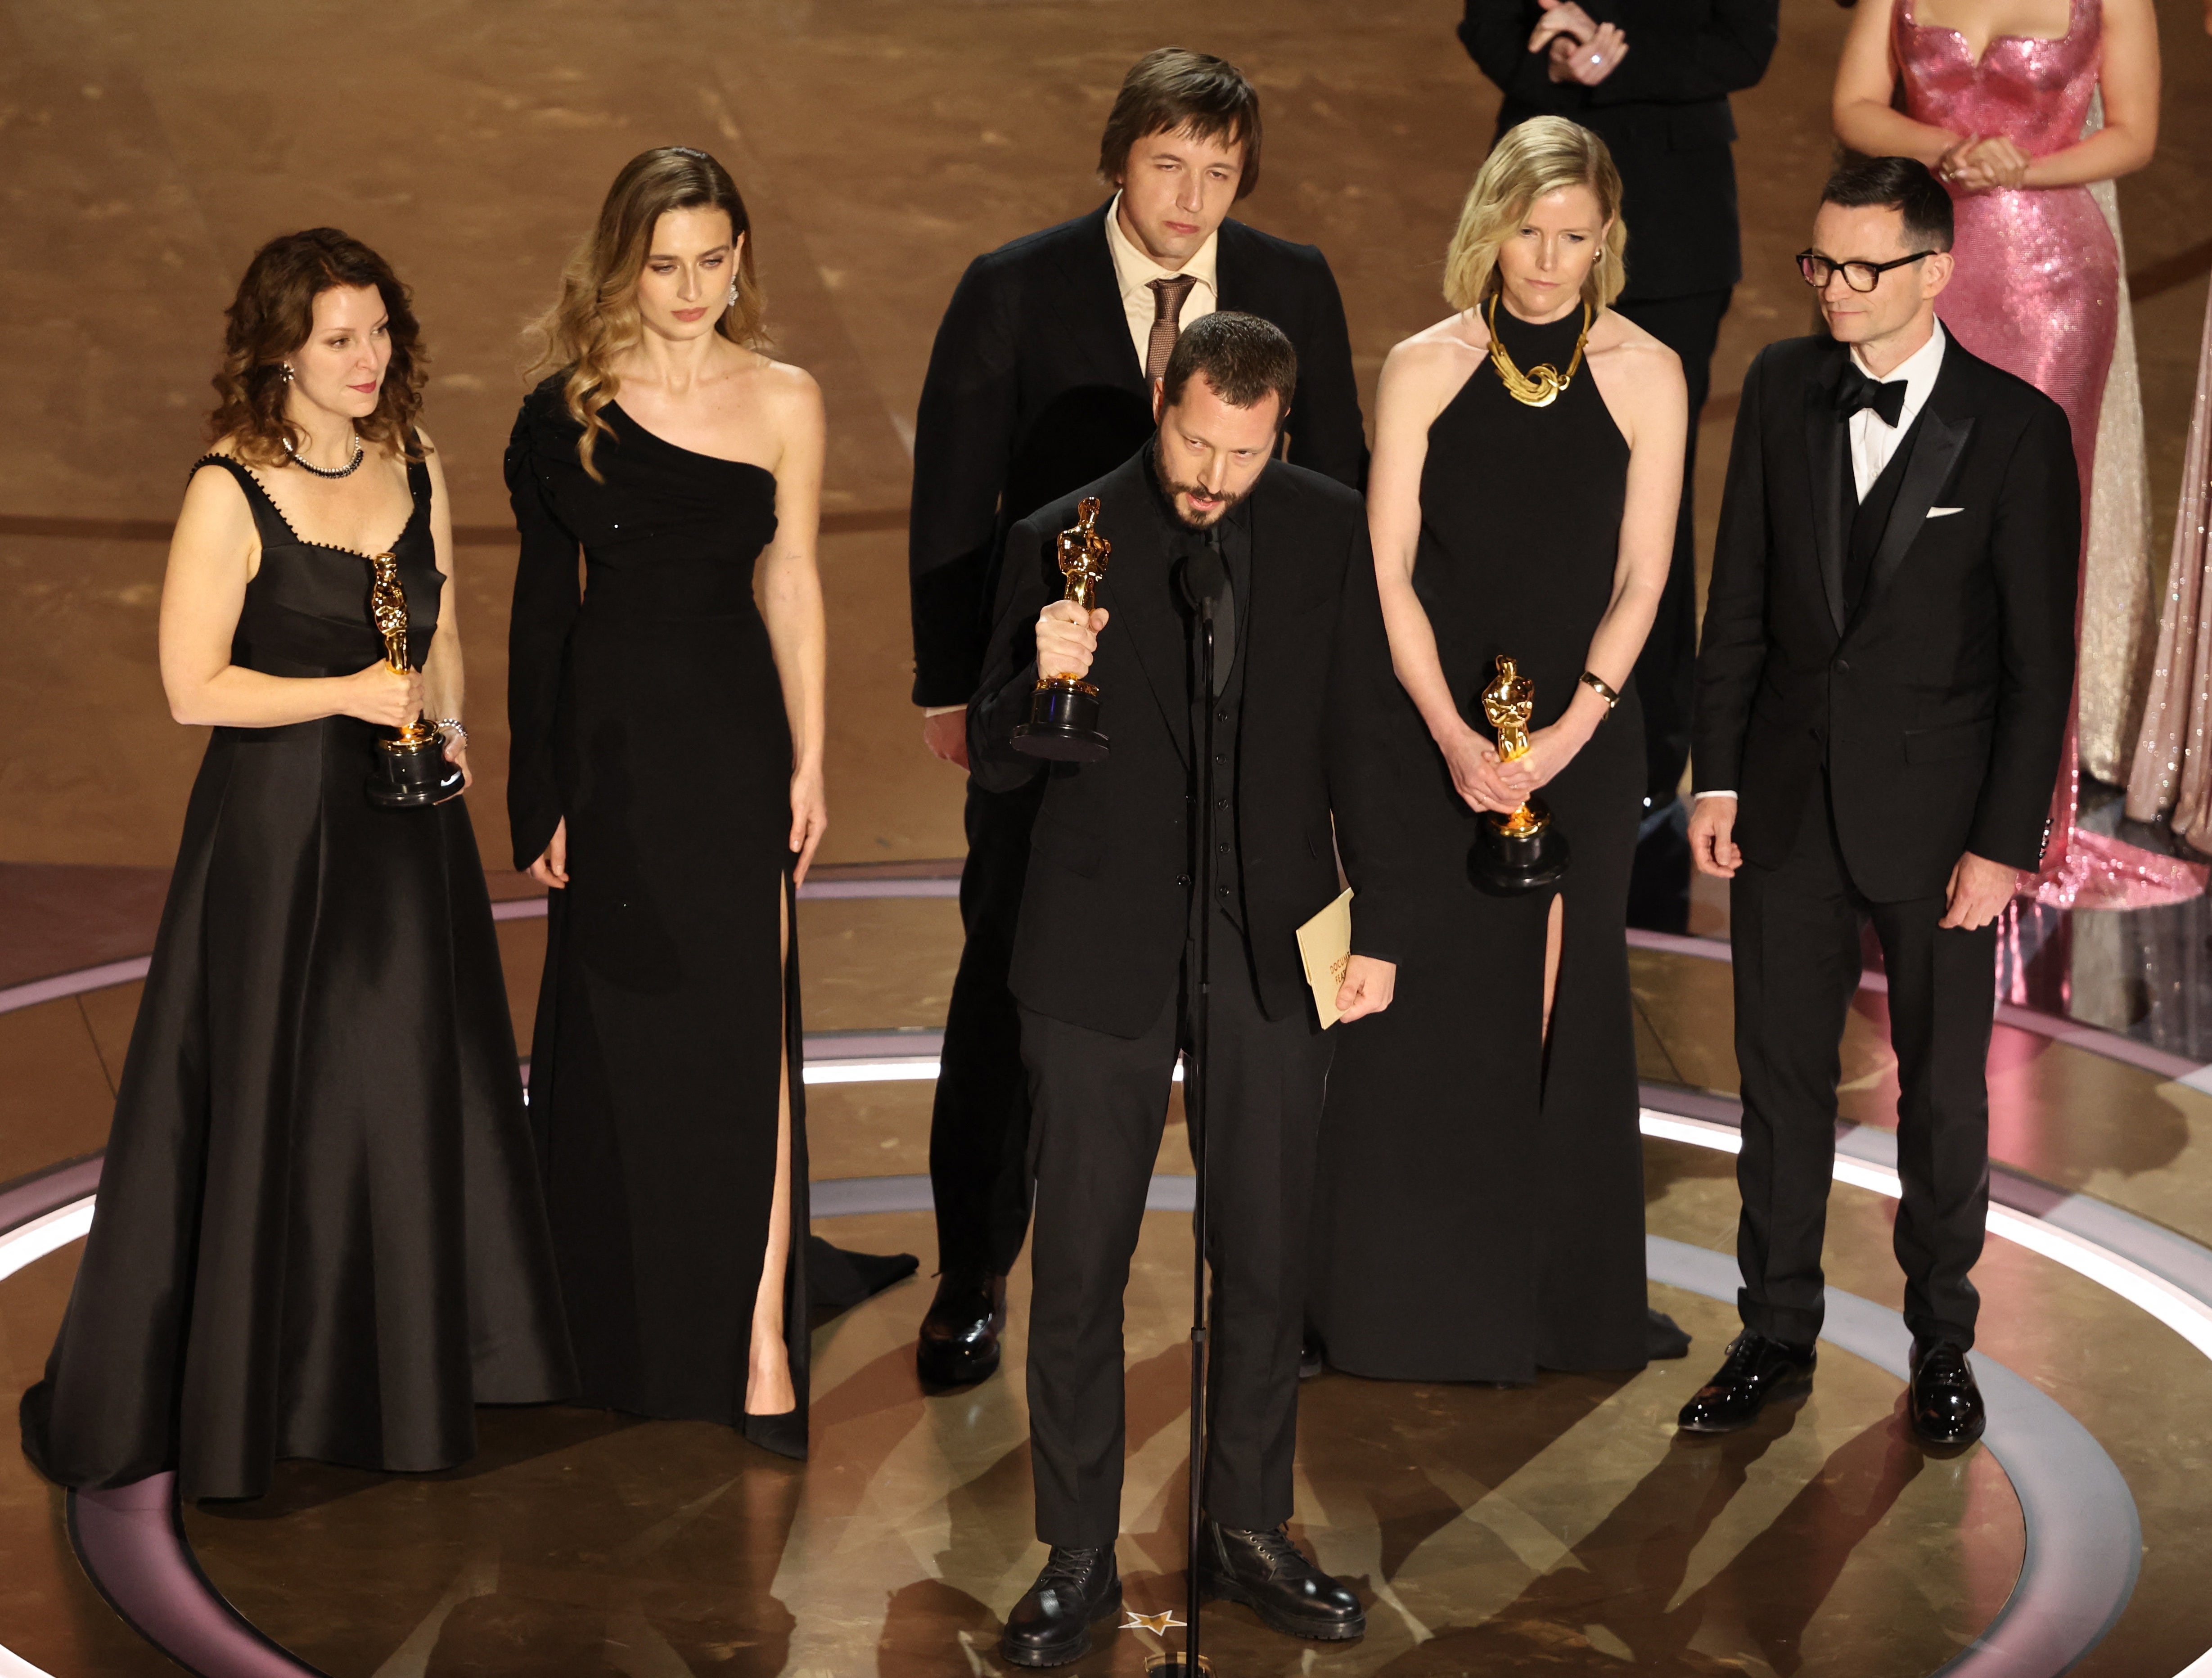 Director Mstyslav Chernov gave a powerful speech during his acceptance at the Oscars